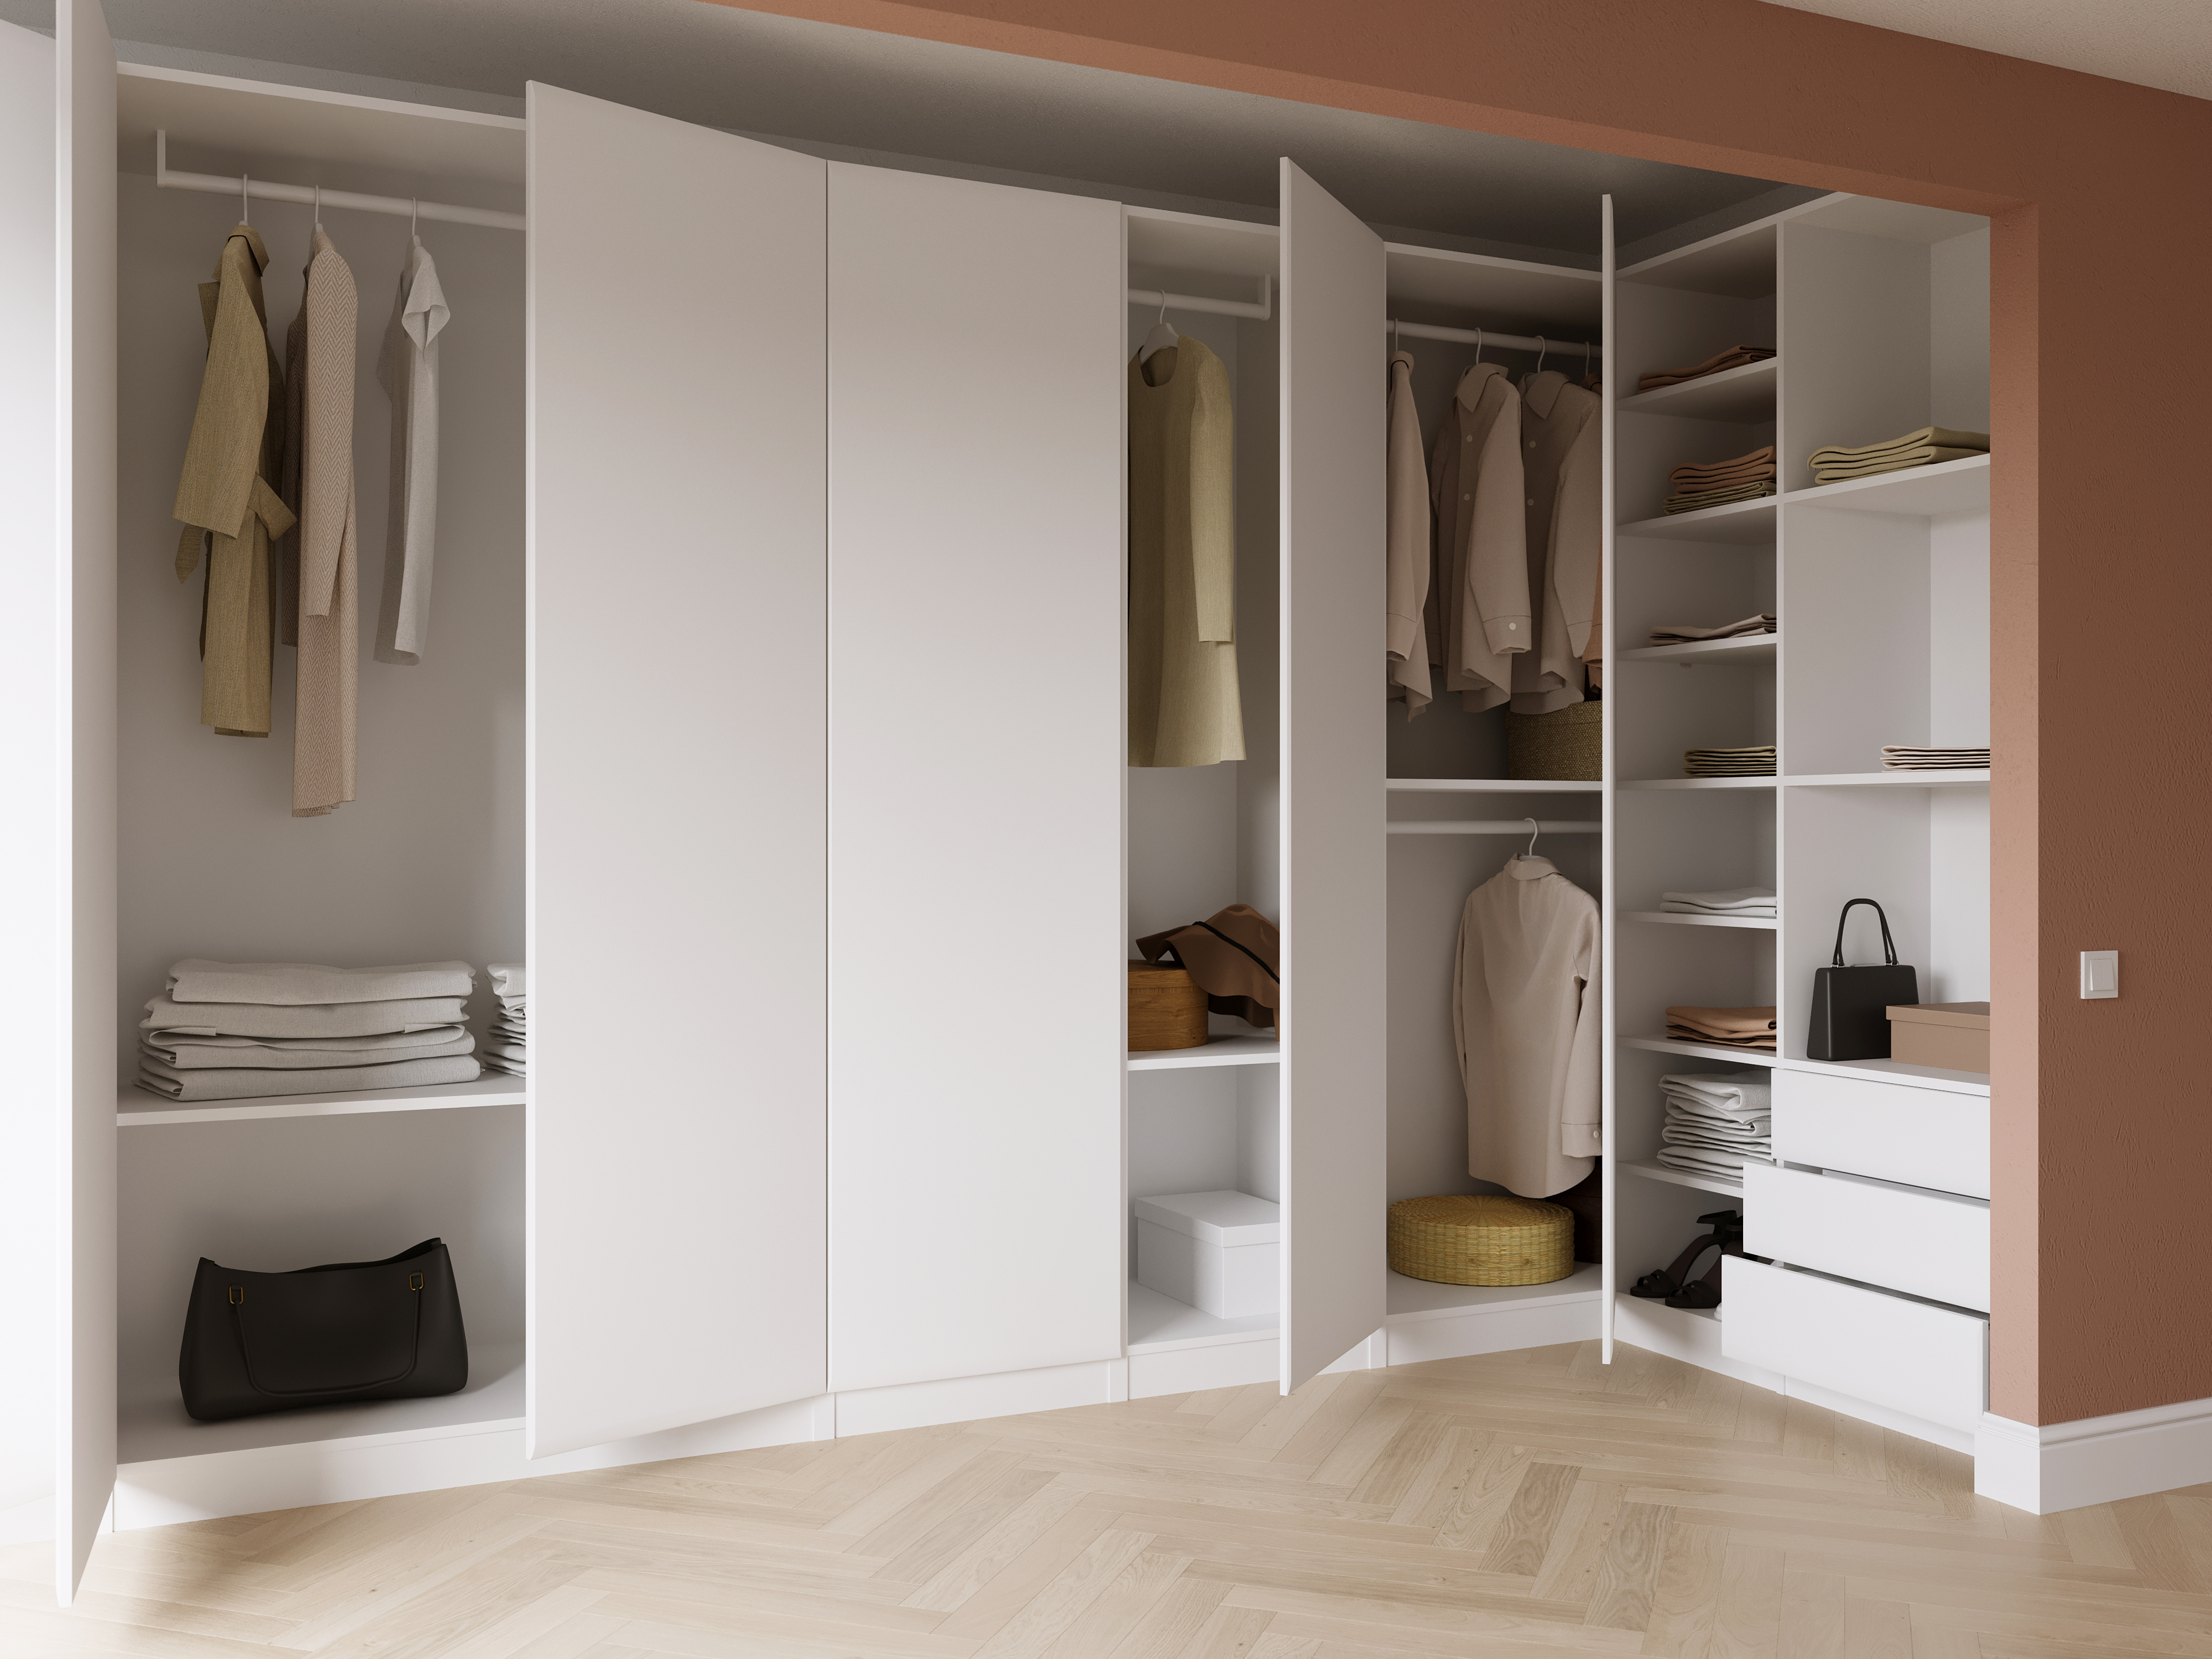 Made-to-measure bedroom wardrobe fronts: making living dreams come true!